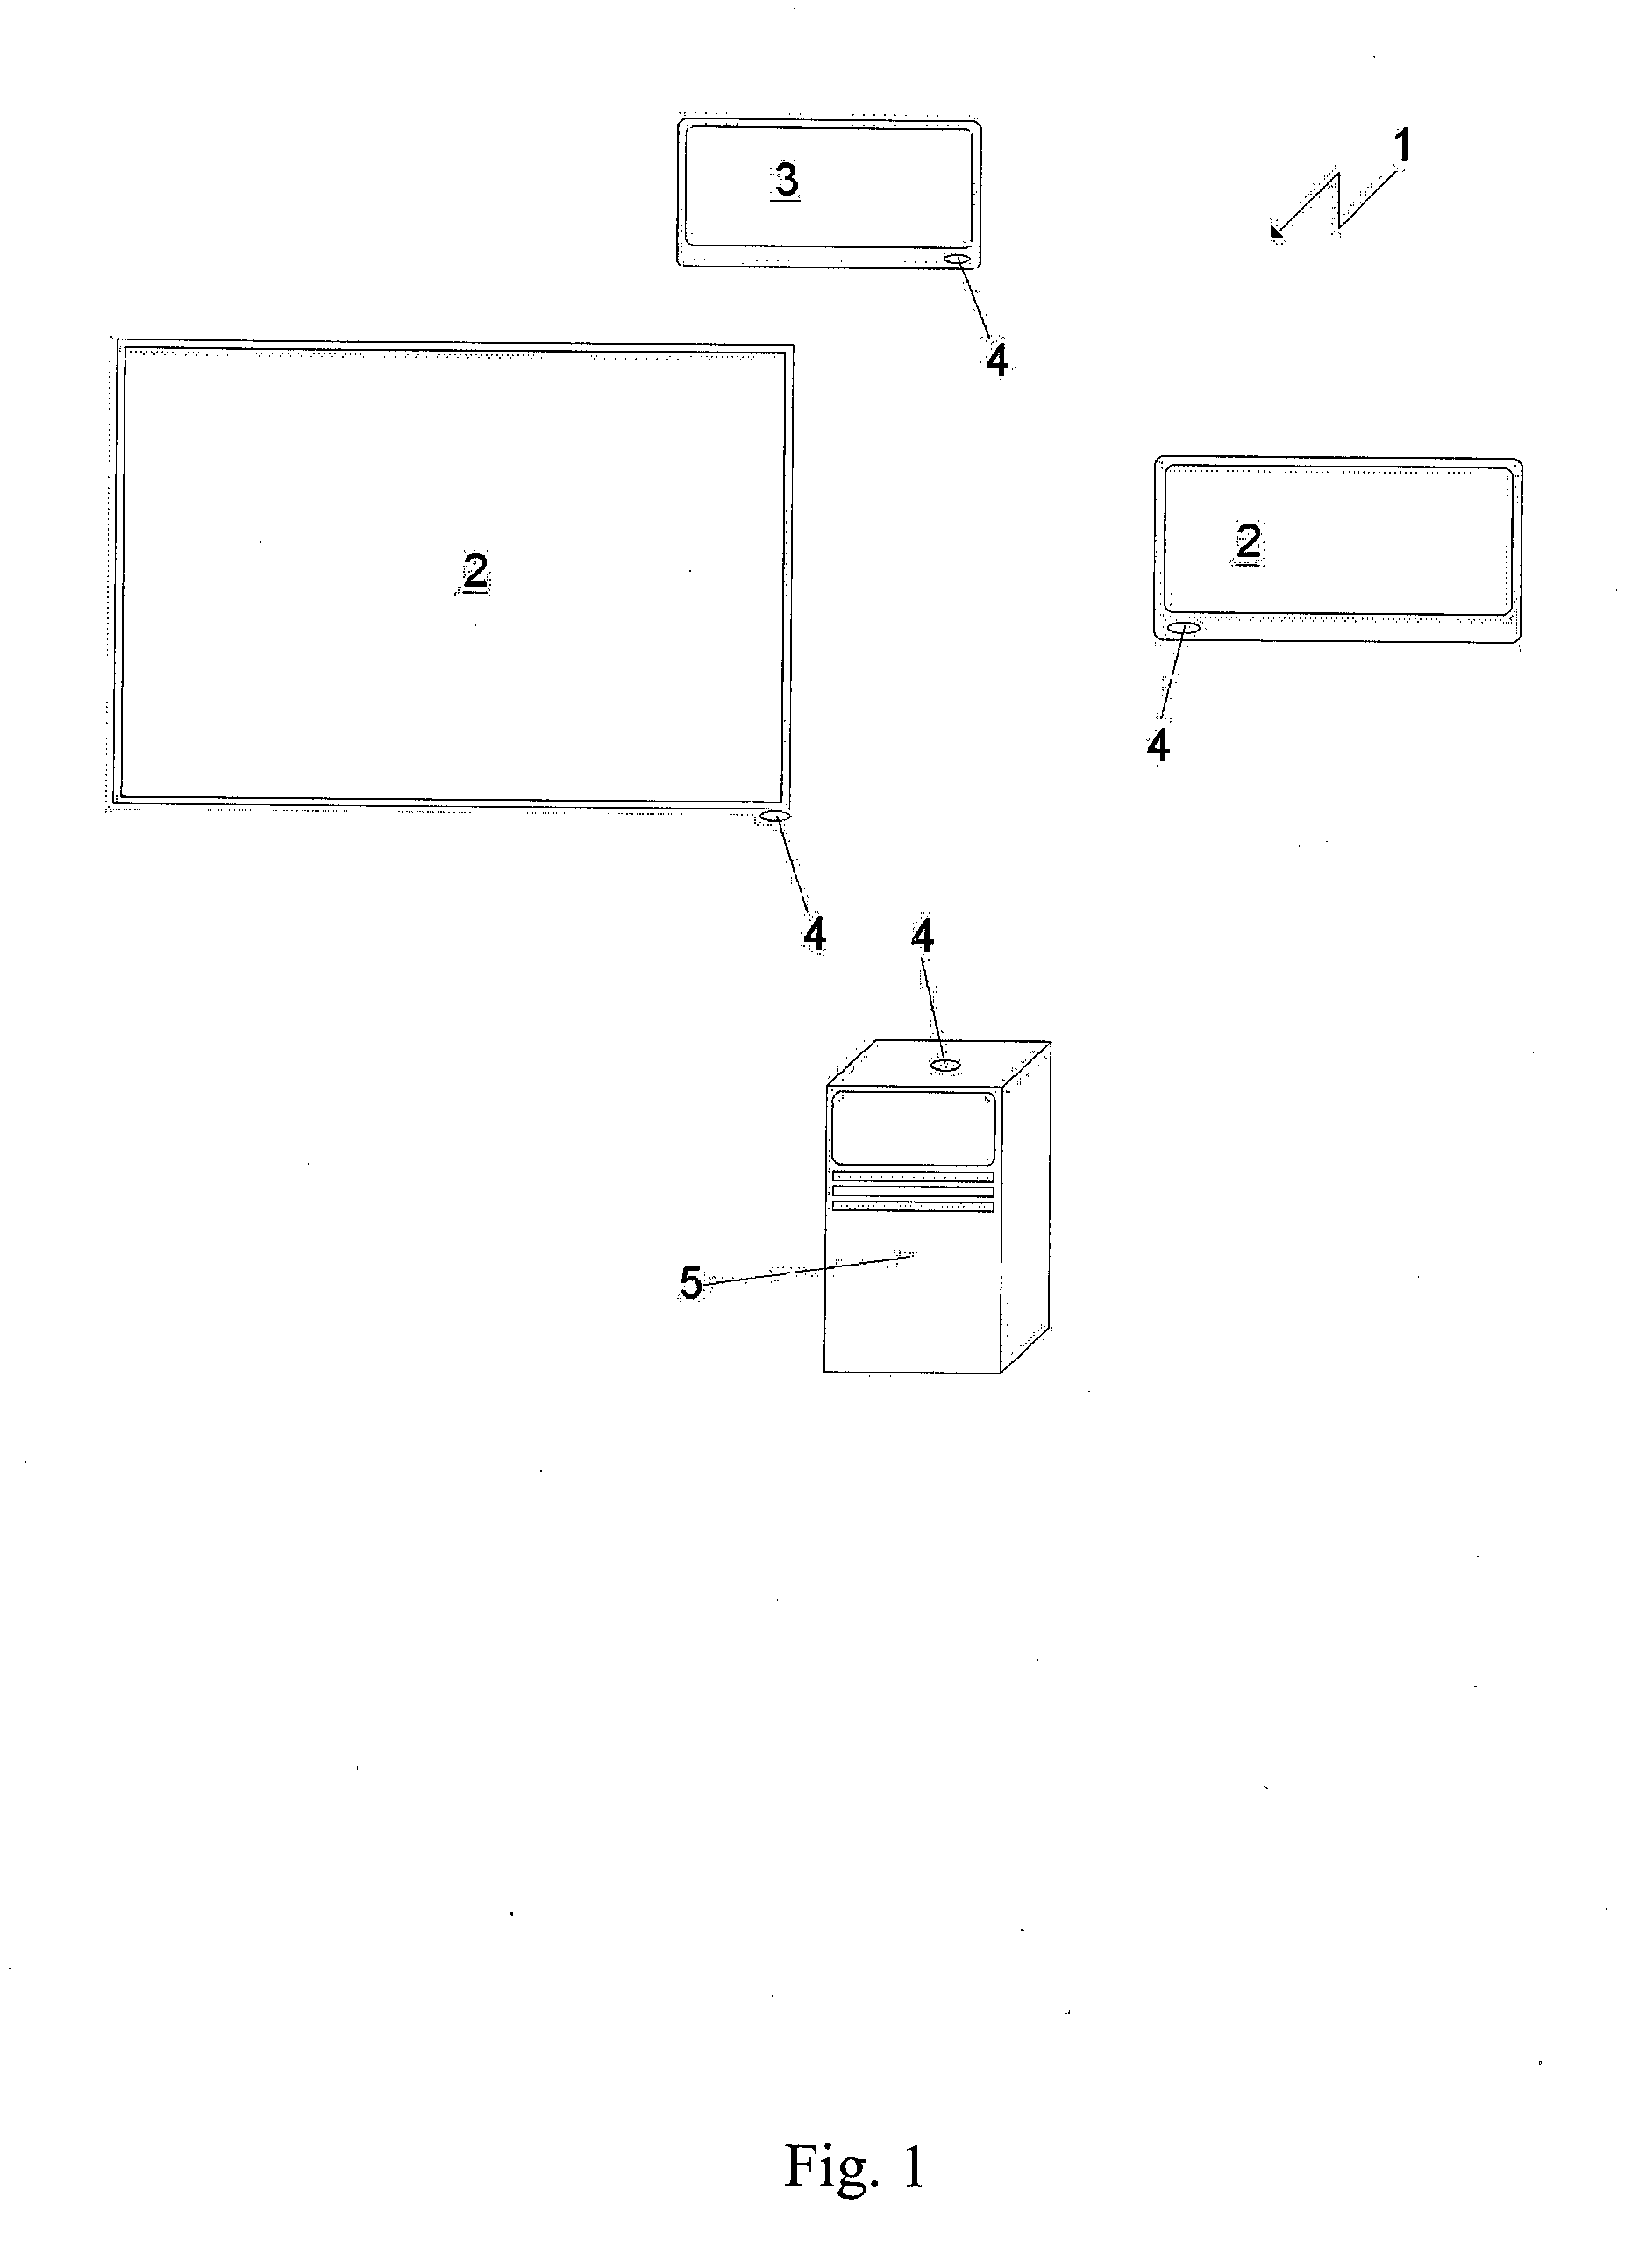 Network of devices for performing optical/optometric/opthalmological tests, and method for controlling said network of devices